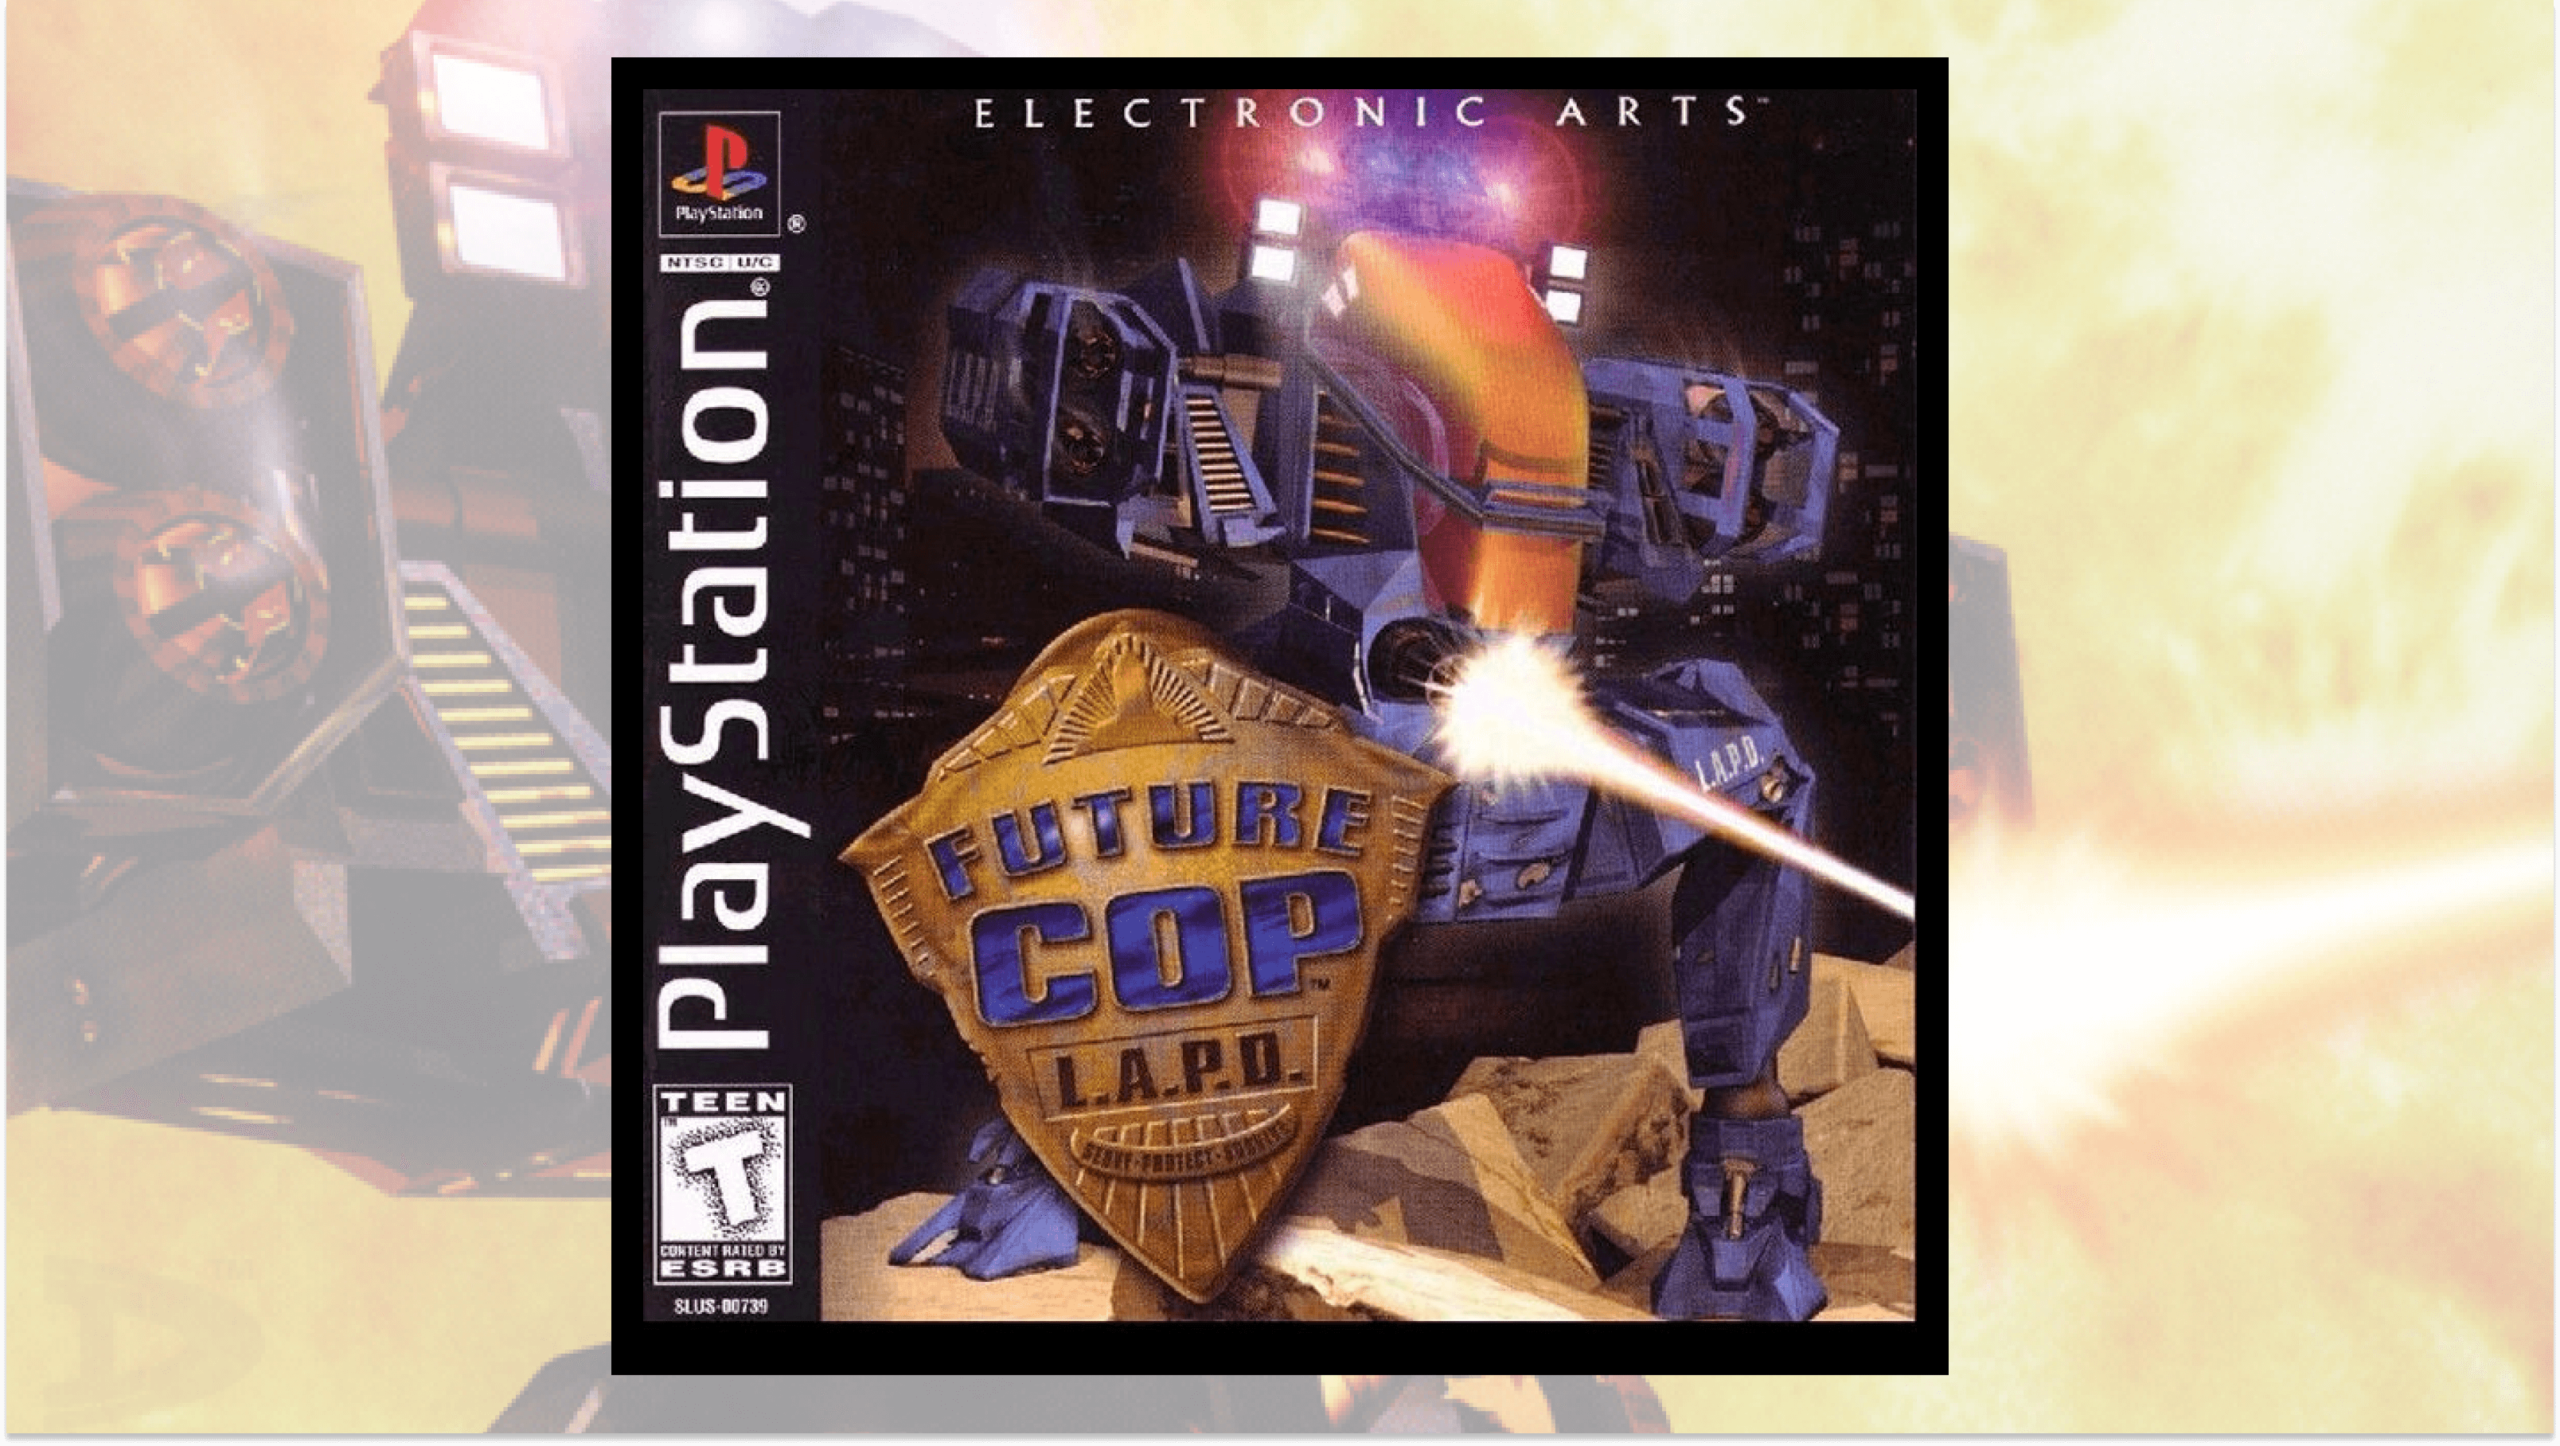 You are currently viewing Future Cop LAPD: An Afterthought